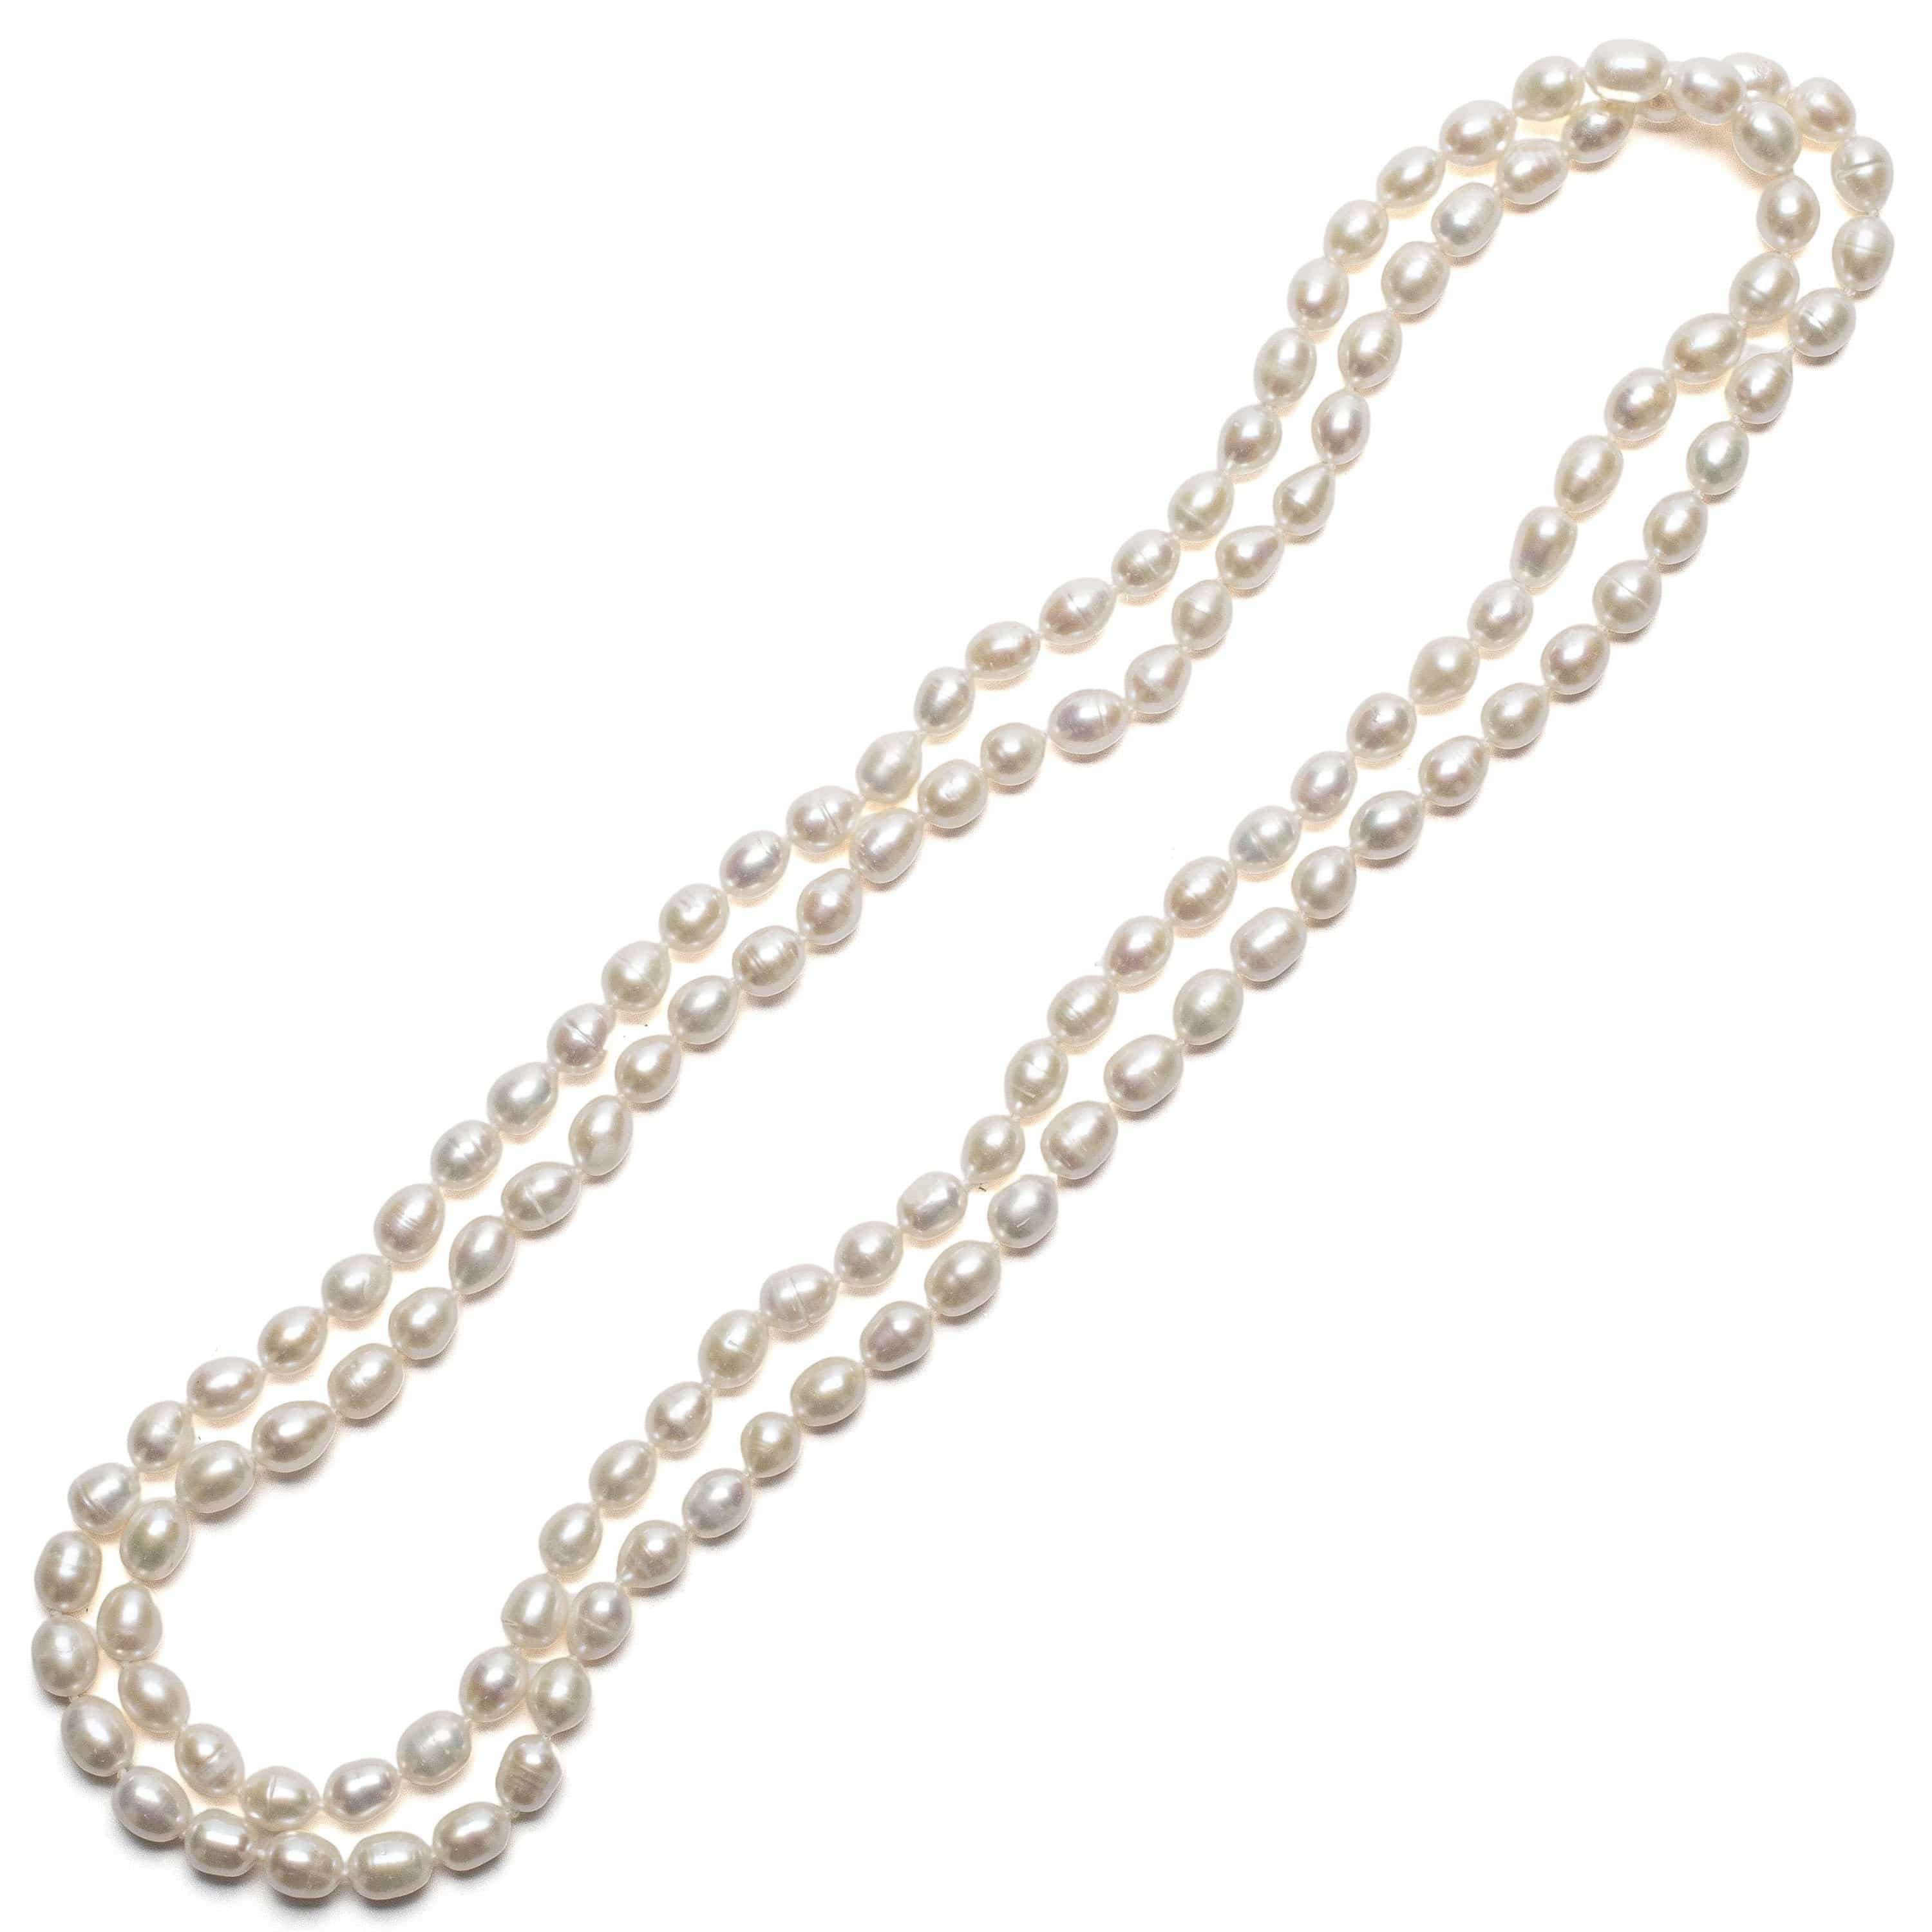 Kalifano Jewelry BLACK-NGP - 56" Cultured Pearl Necklace (9mm-10mm) BLACK-NGP